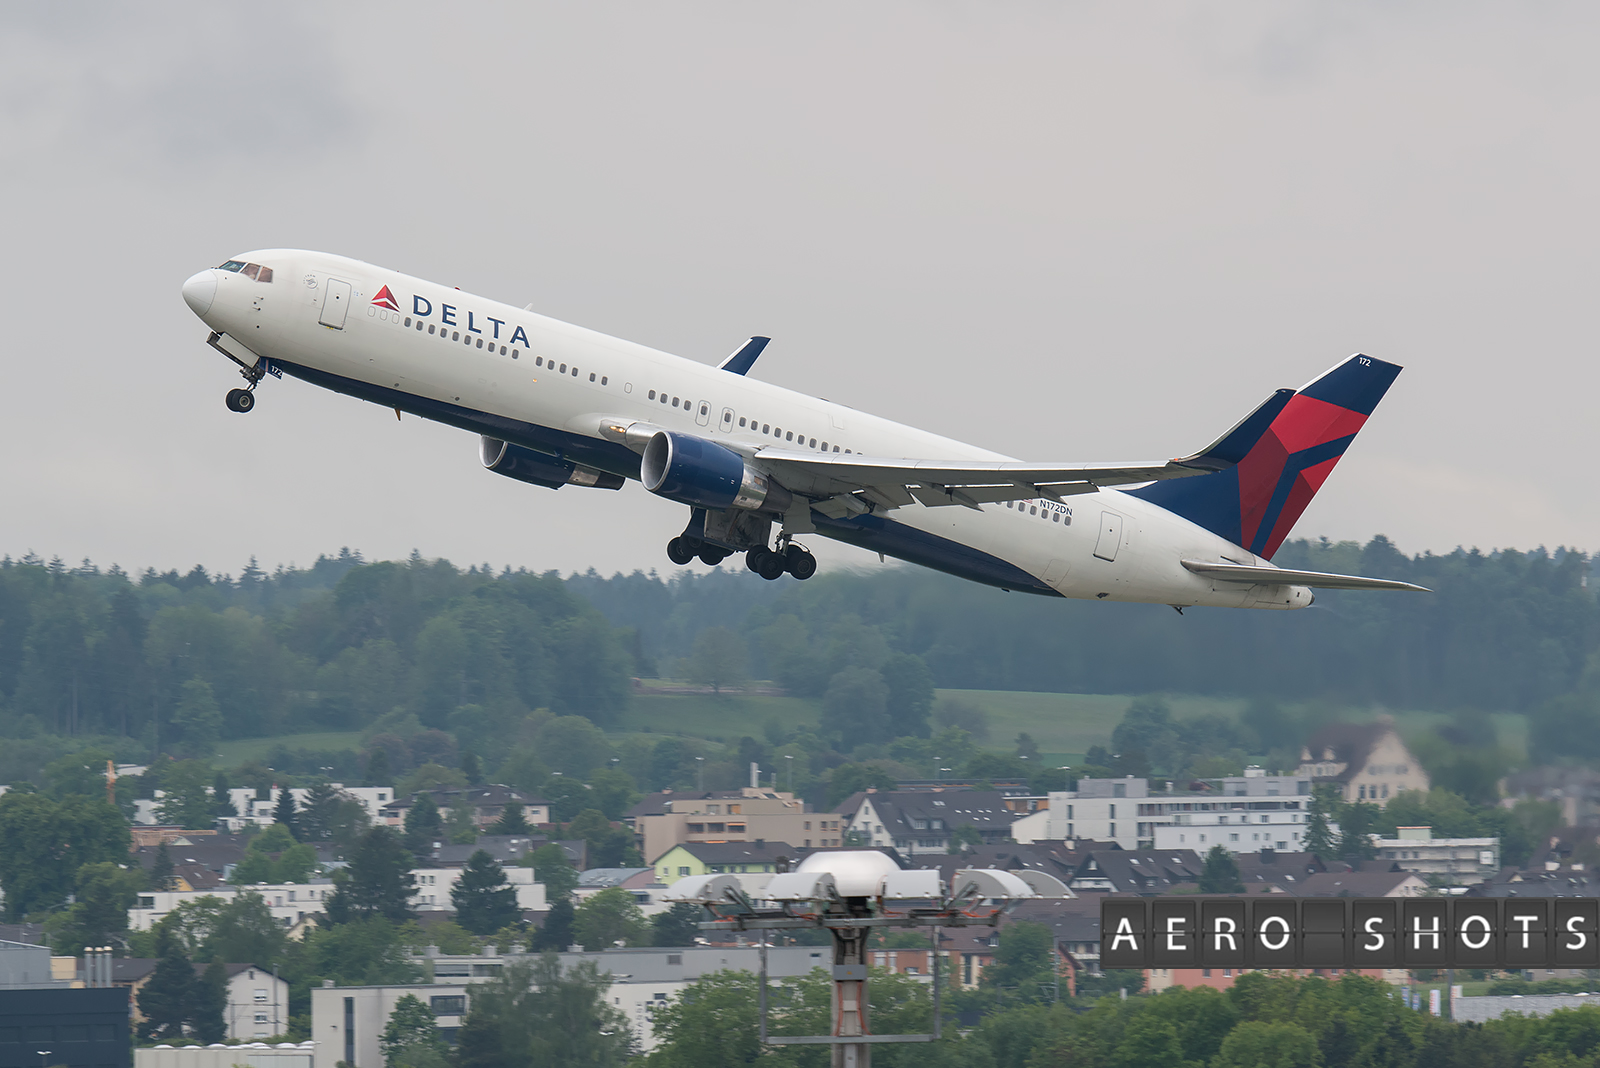 A Delta Air Lines aircraft is taking off, with its landing gear still extended. The plane is ascending against a backdrop of a cloudy sky and a landscape featuring trees and buildings. The image has the text "AERO SHOTS" in the bottom right corner.